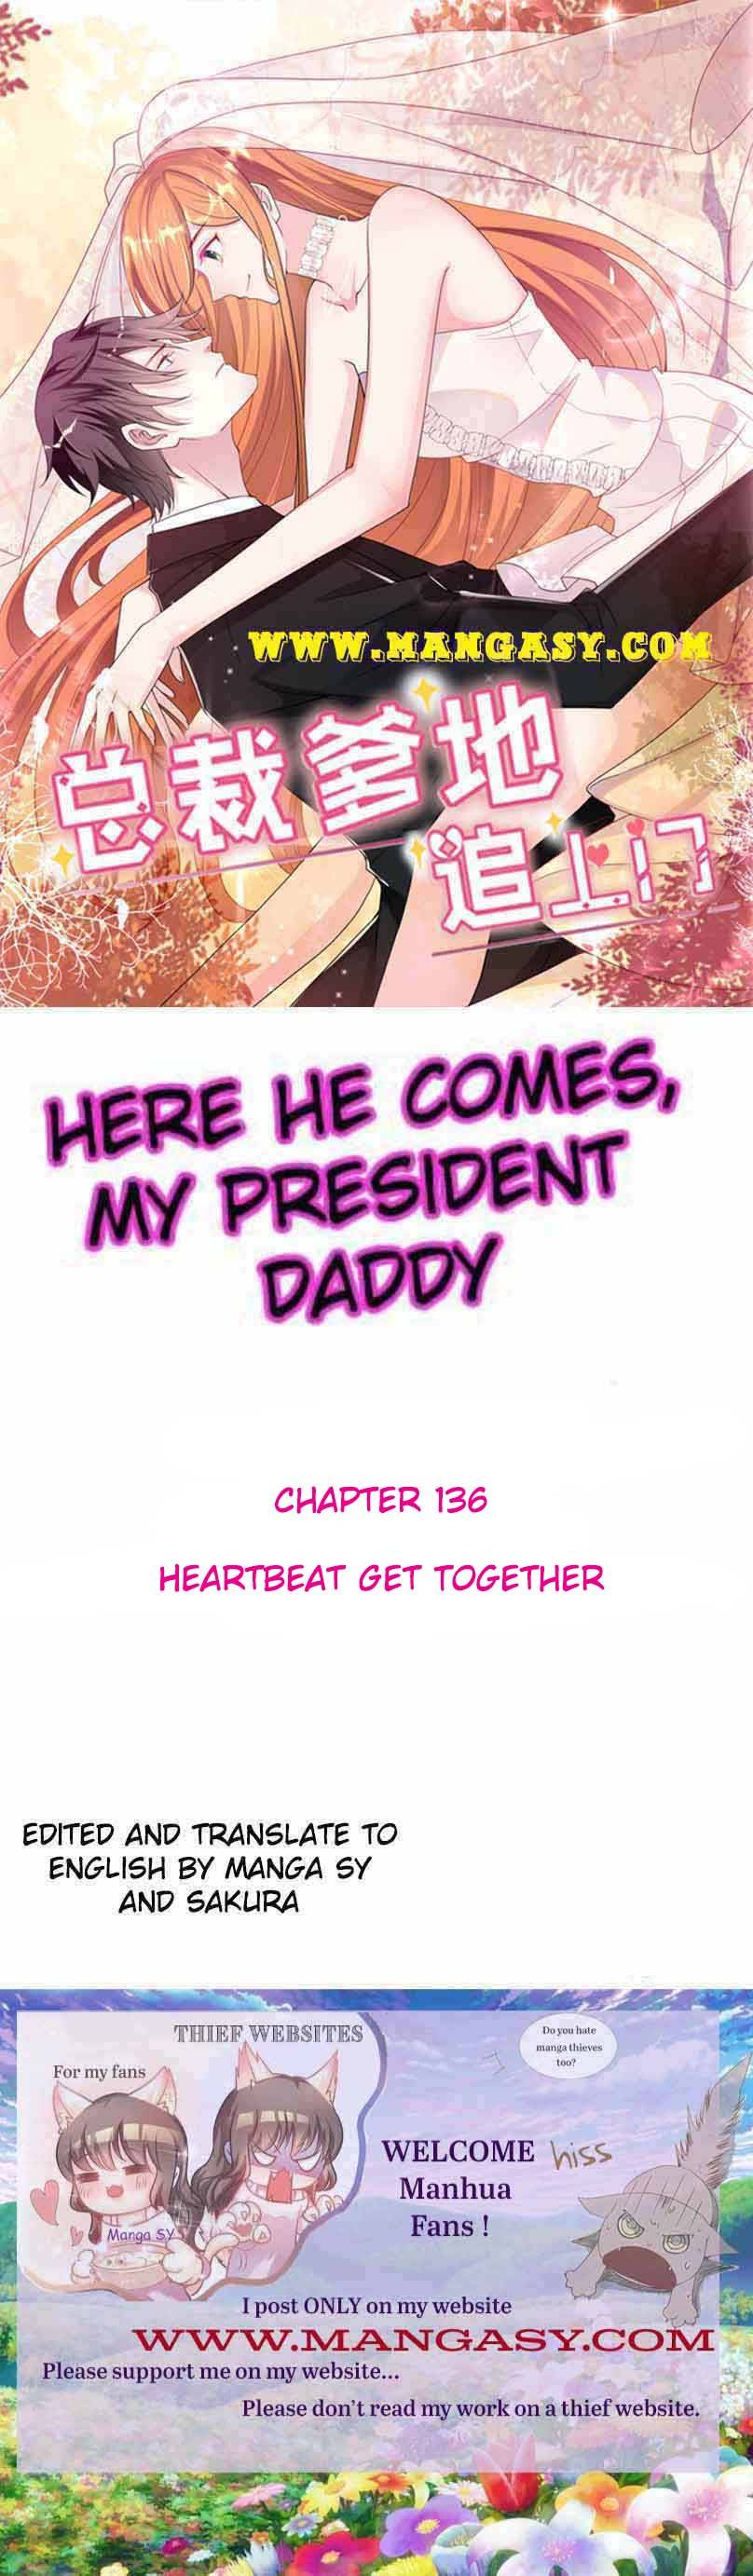 President daddy is chasing you Chapter 136 - page 1